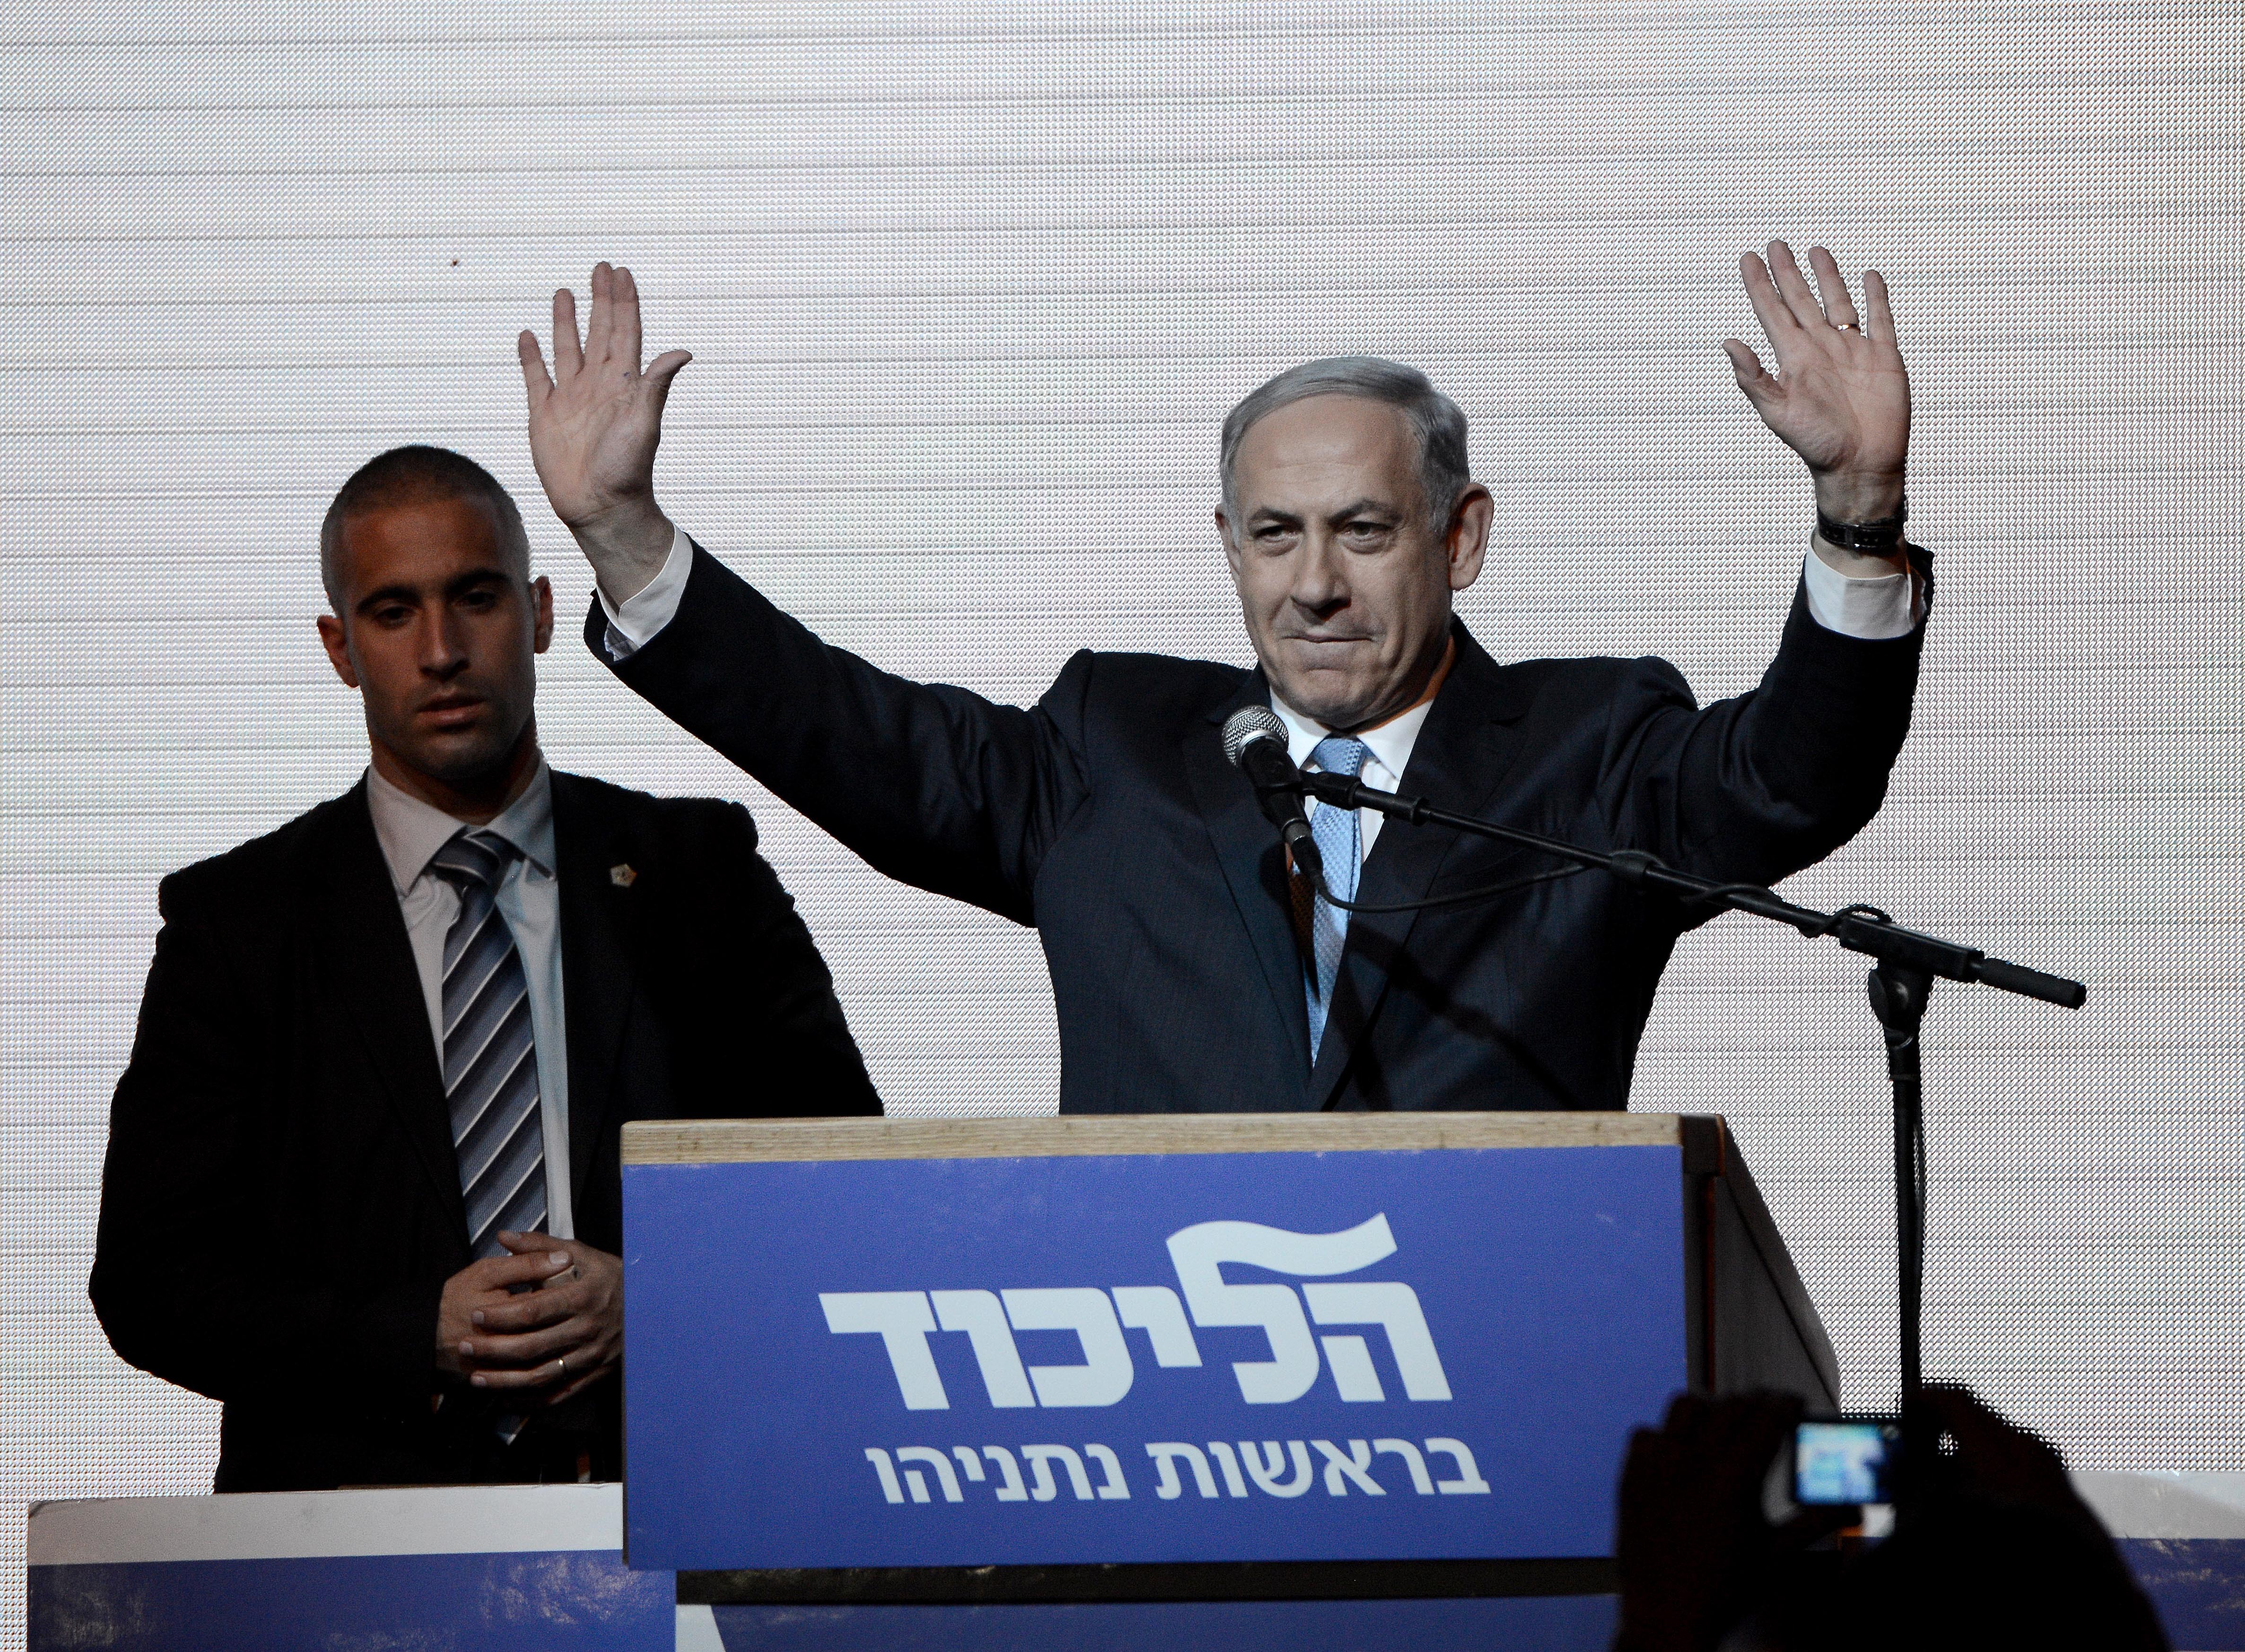 Israeli Prime Minister and the leader of the Likud Party Benjamin Netanyahu greets supporters at the party's election headquarters after the first results of the Israeli general election on March 18, 2015